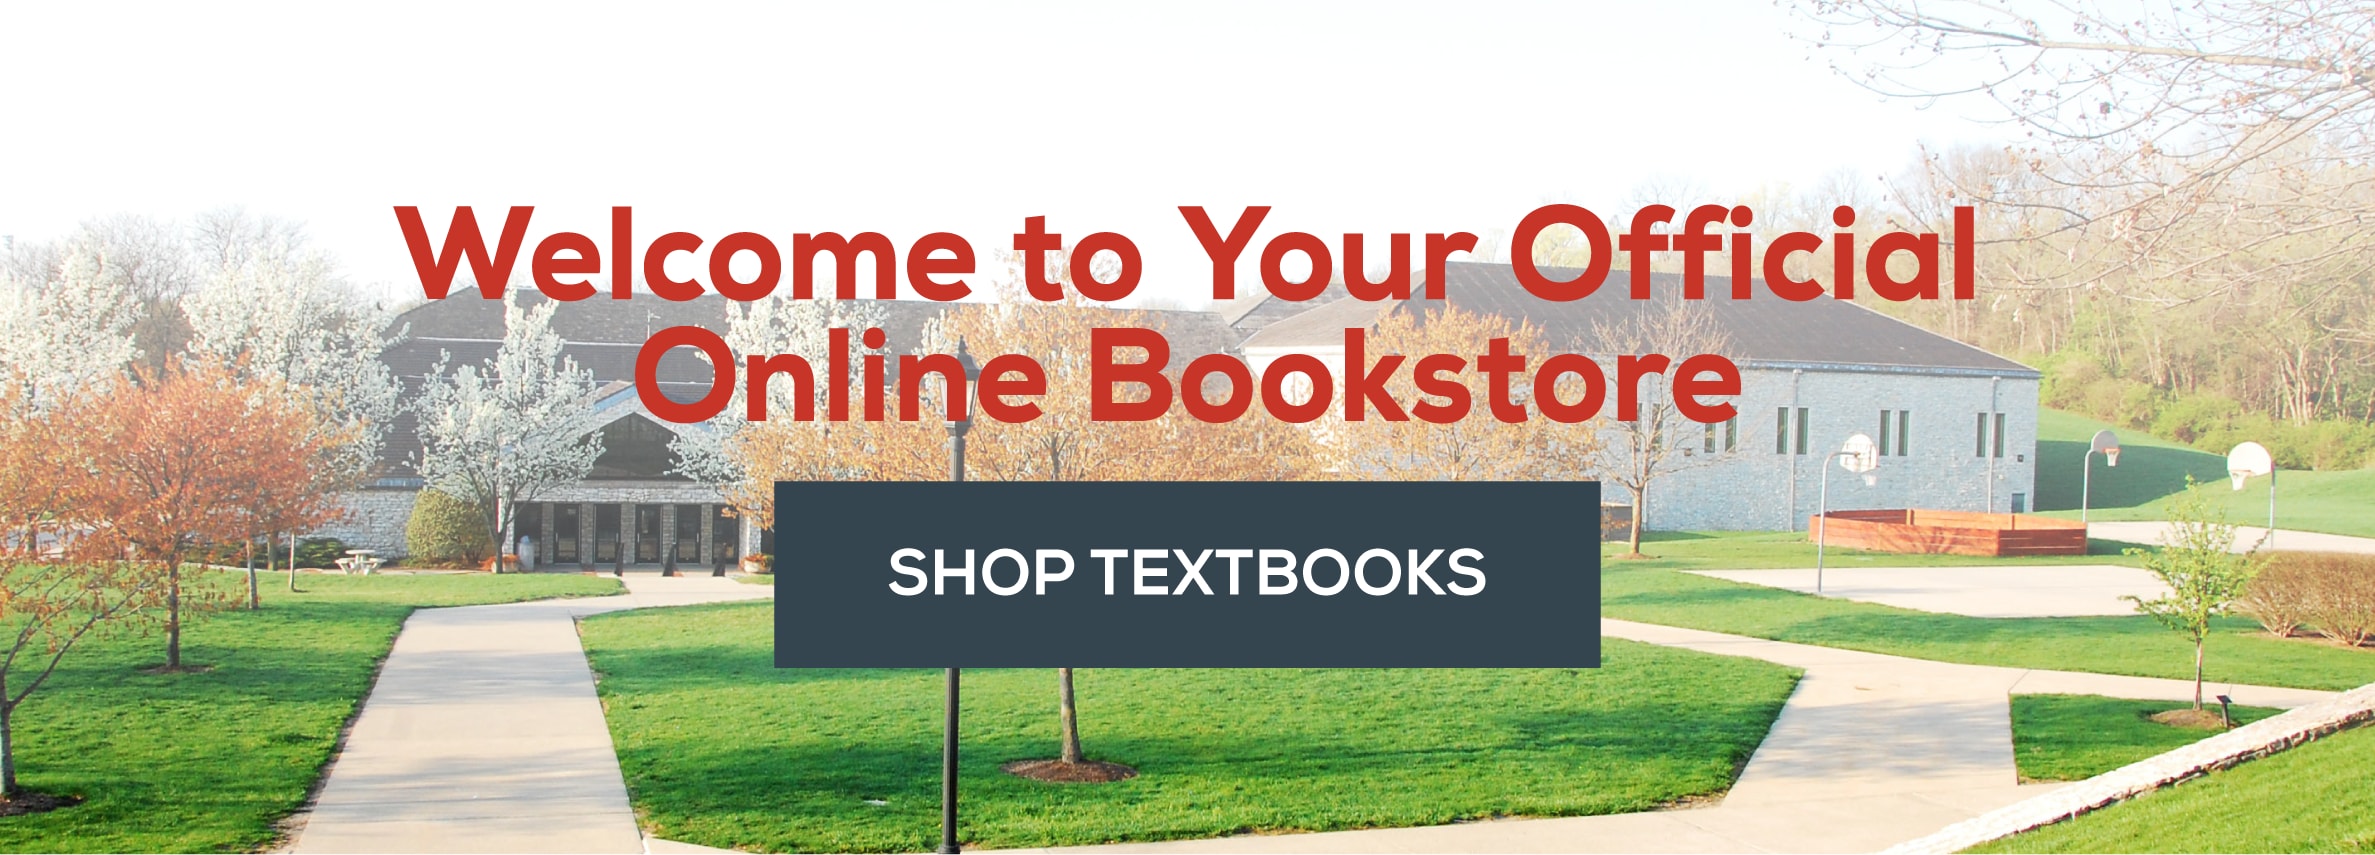 Welcome to your official online bookstore. Shop textbooks.